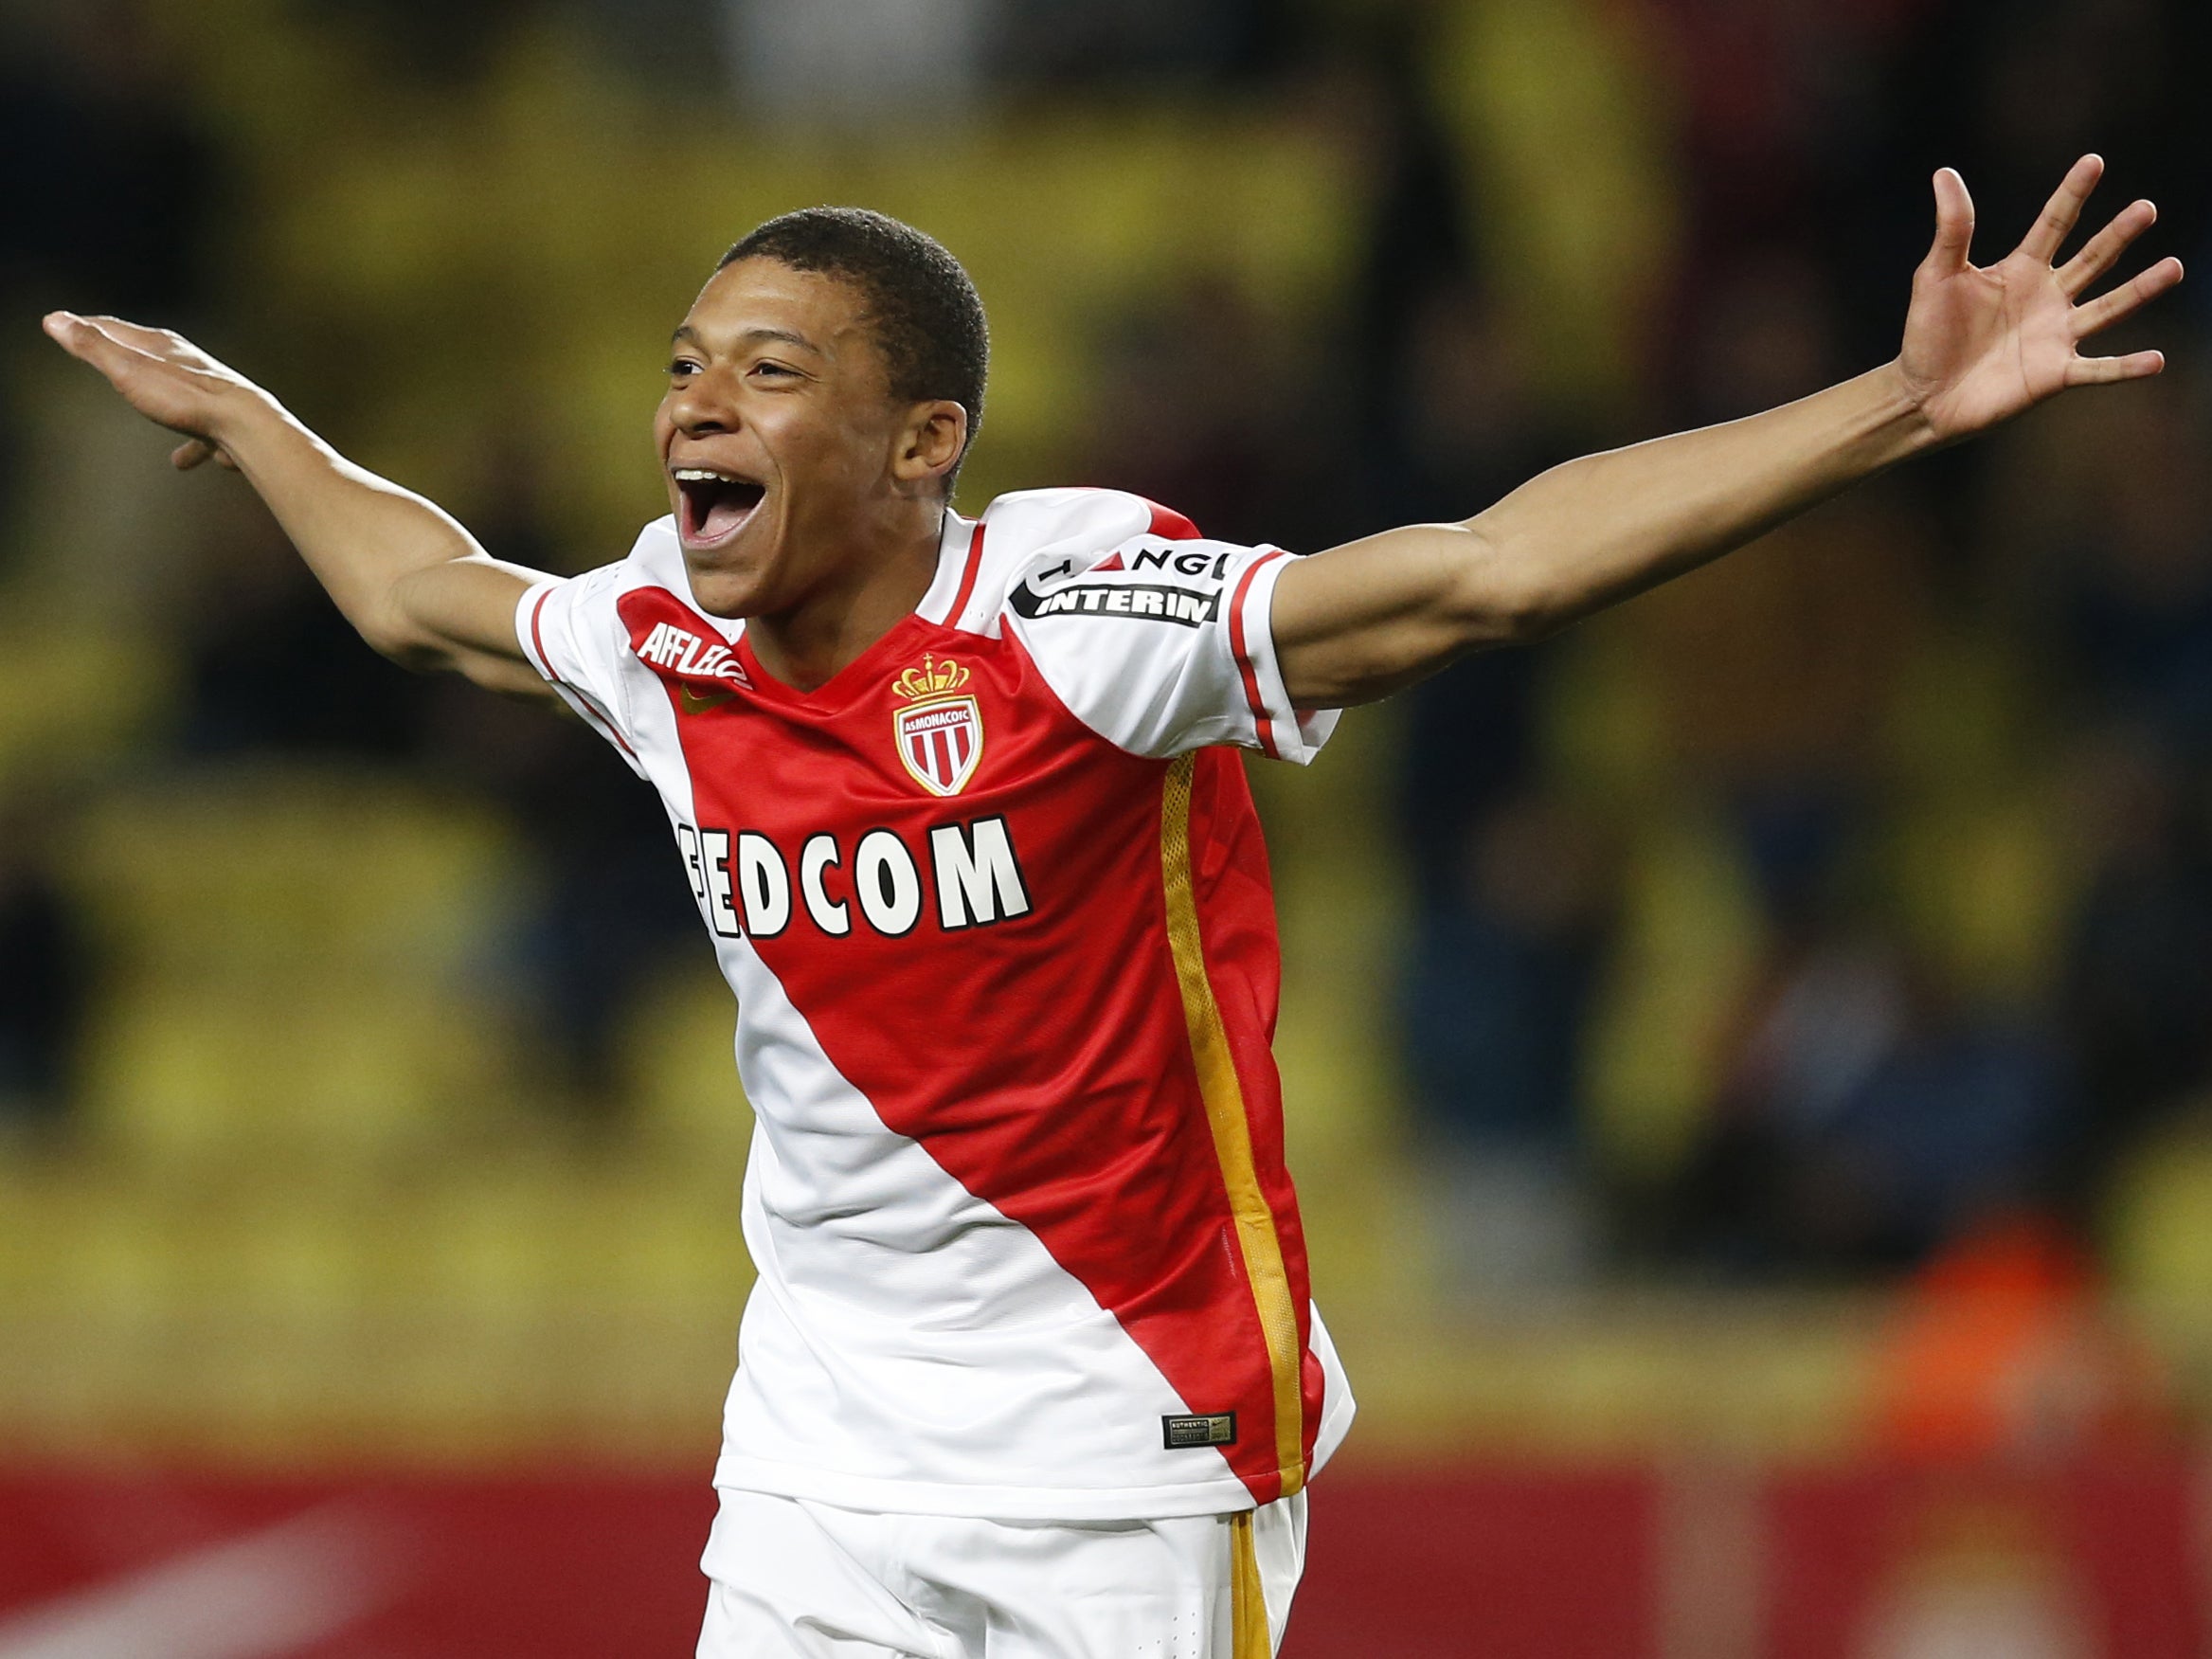 Monaco S Transfer Policy Of Buying Low And Selling High Has Made The